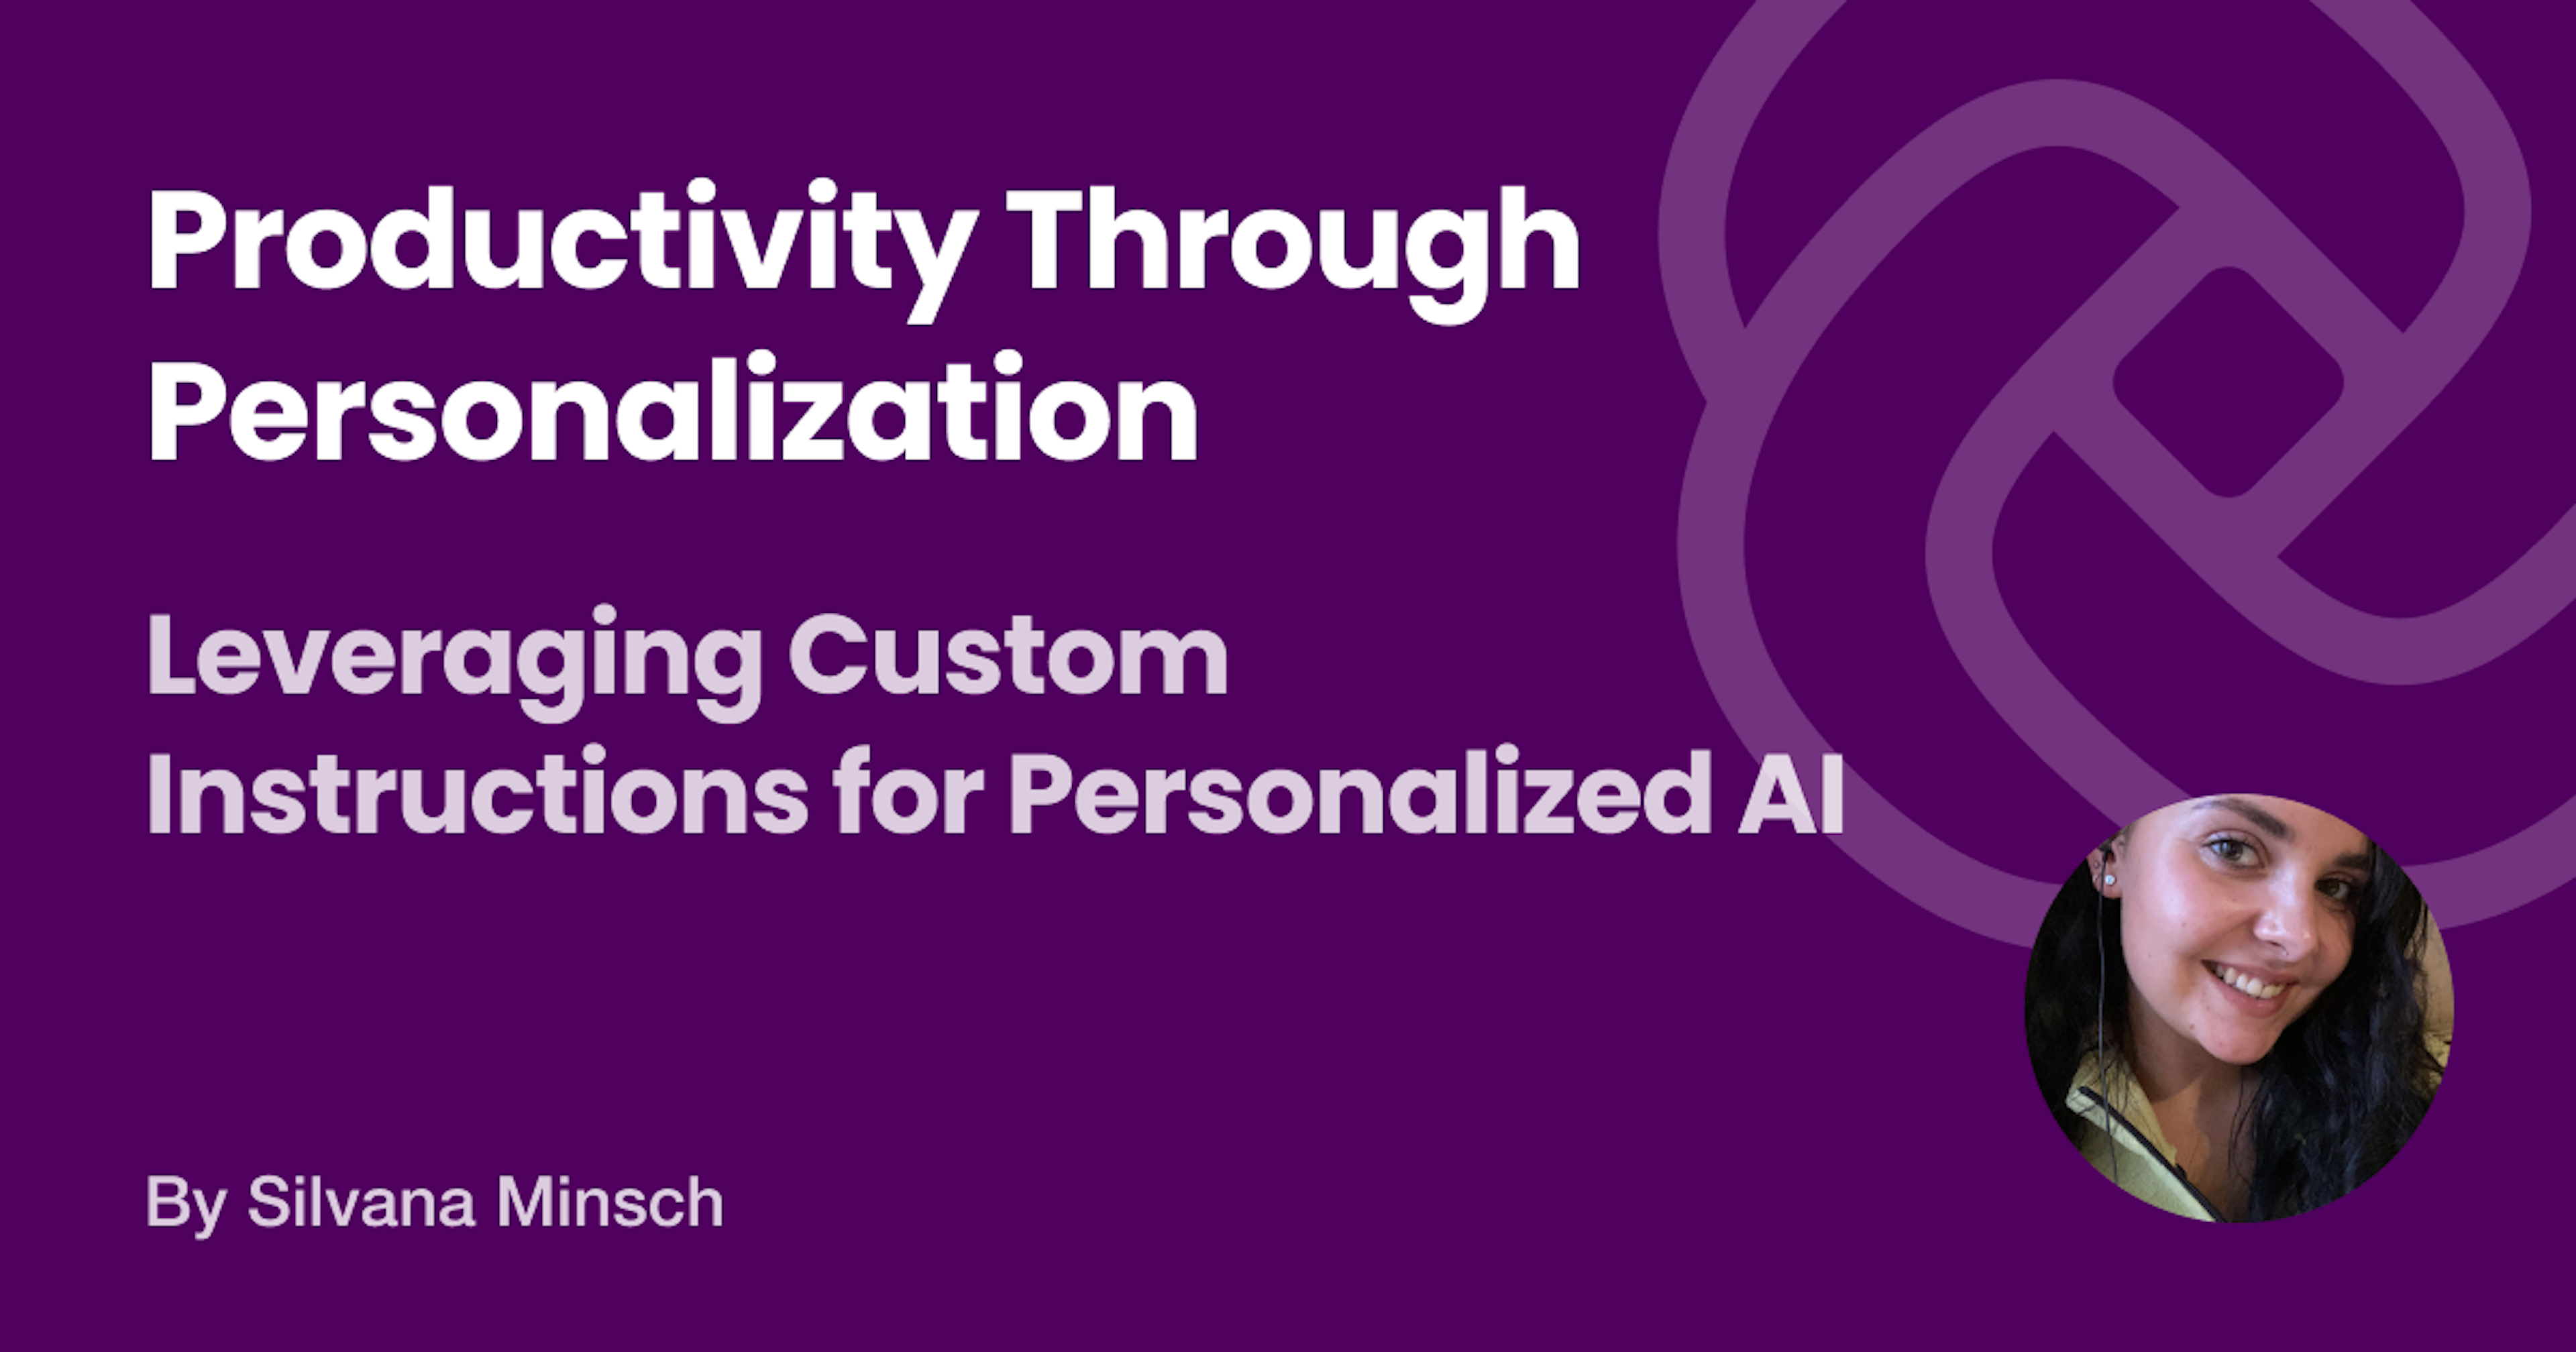 Discover the future of productivity with AI-driven personalization that anticipates and meets your unique needs.